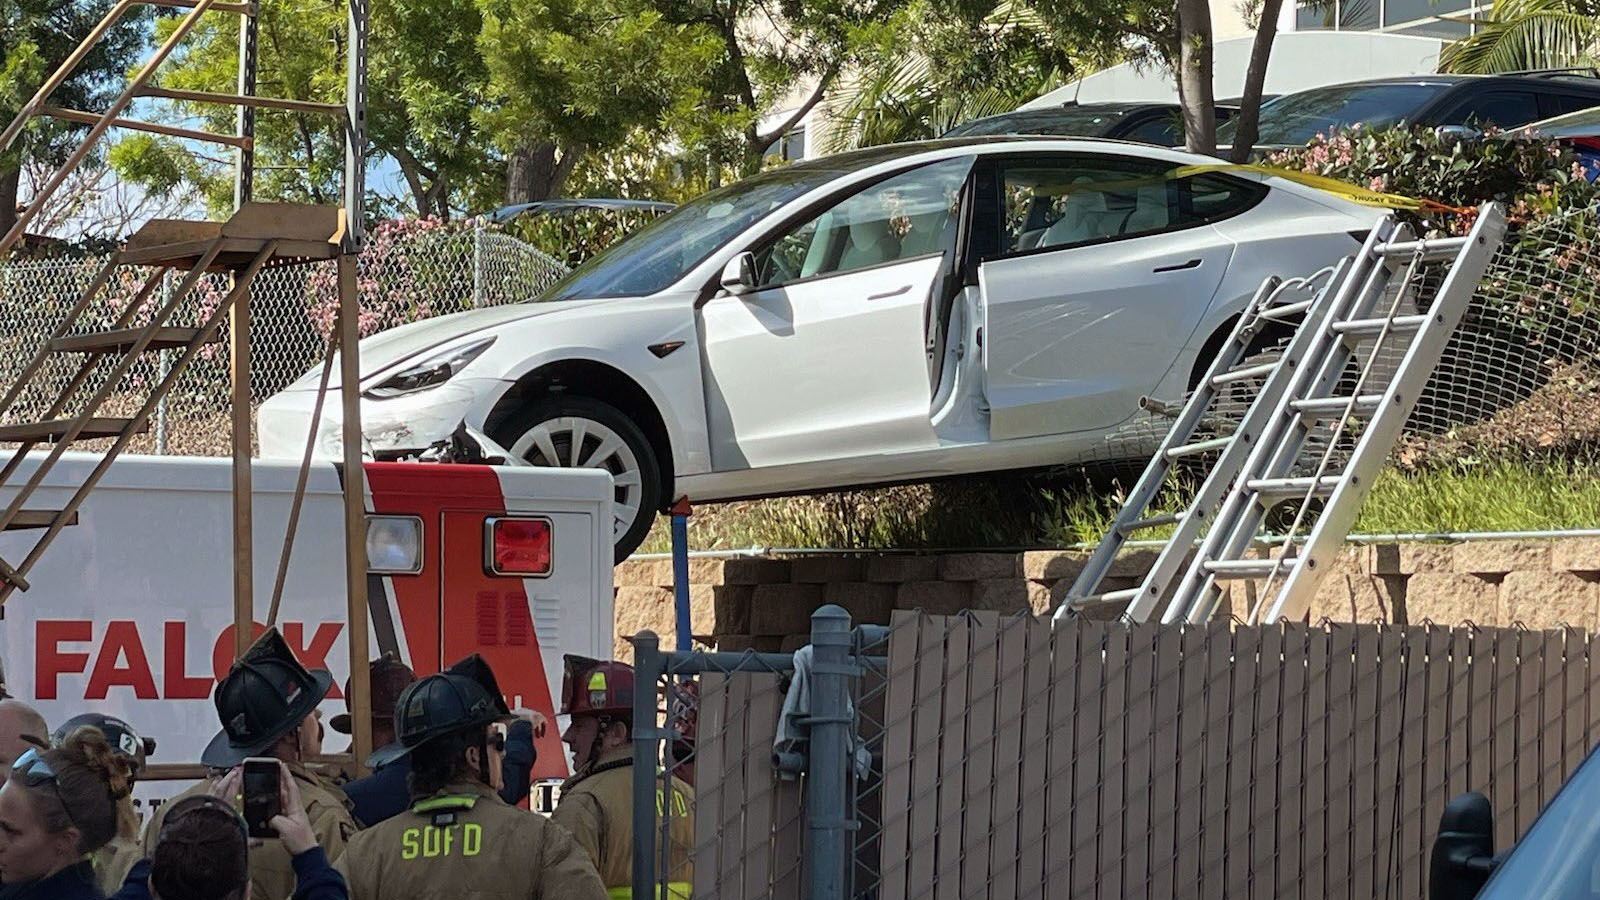 The Tesla that crashed on top of an ambulance was not in self-driving mode, confirm San Diego authorities thumbnail